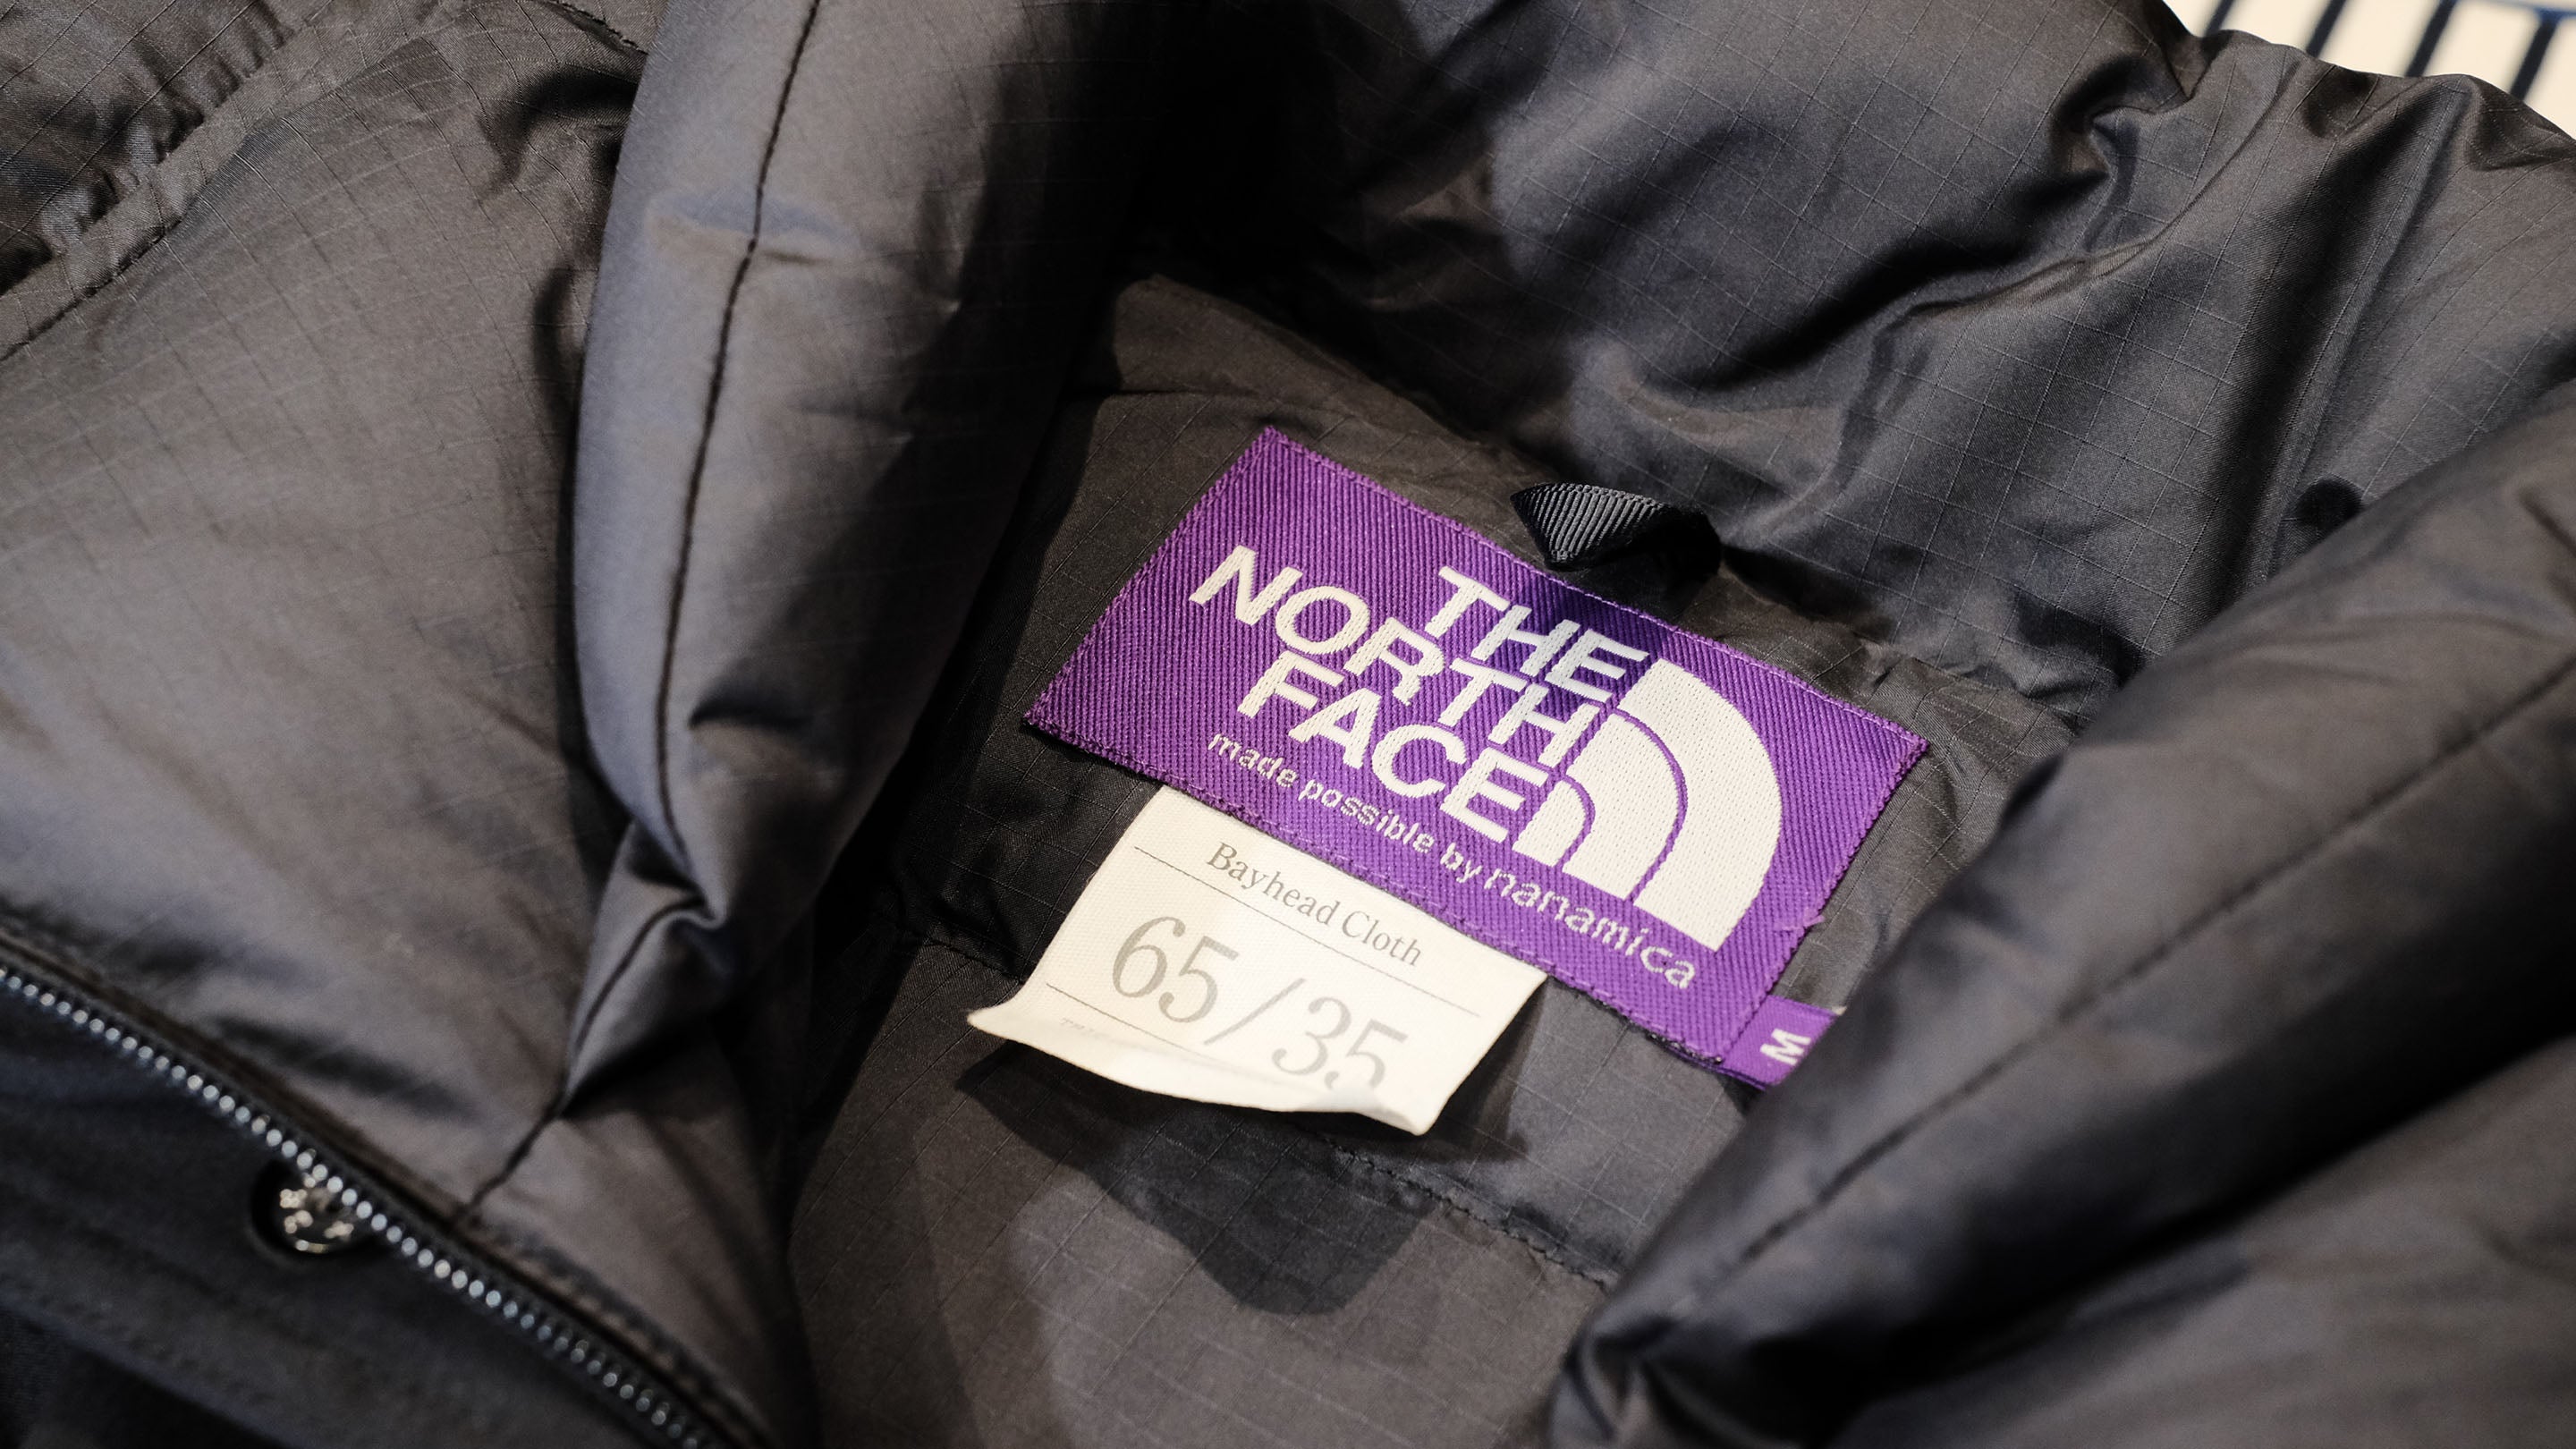 THE NORTH FACE PURPLE LABEL – HINOYA Online Store